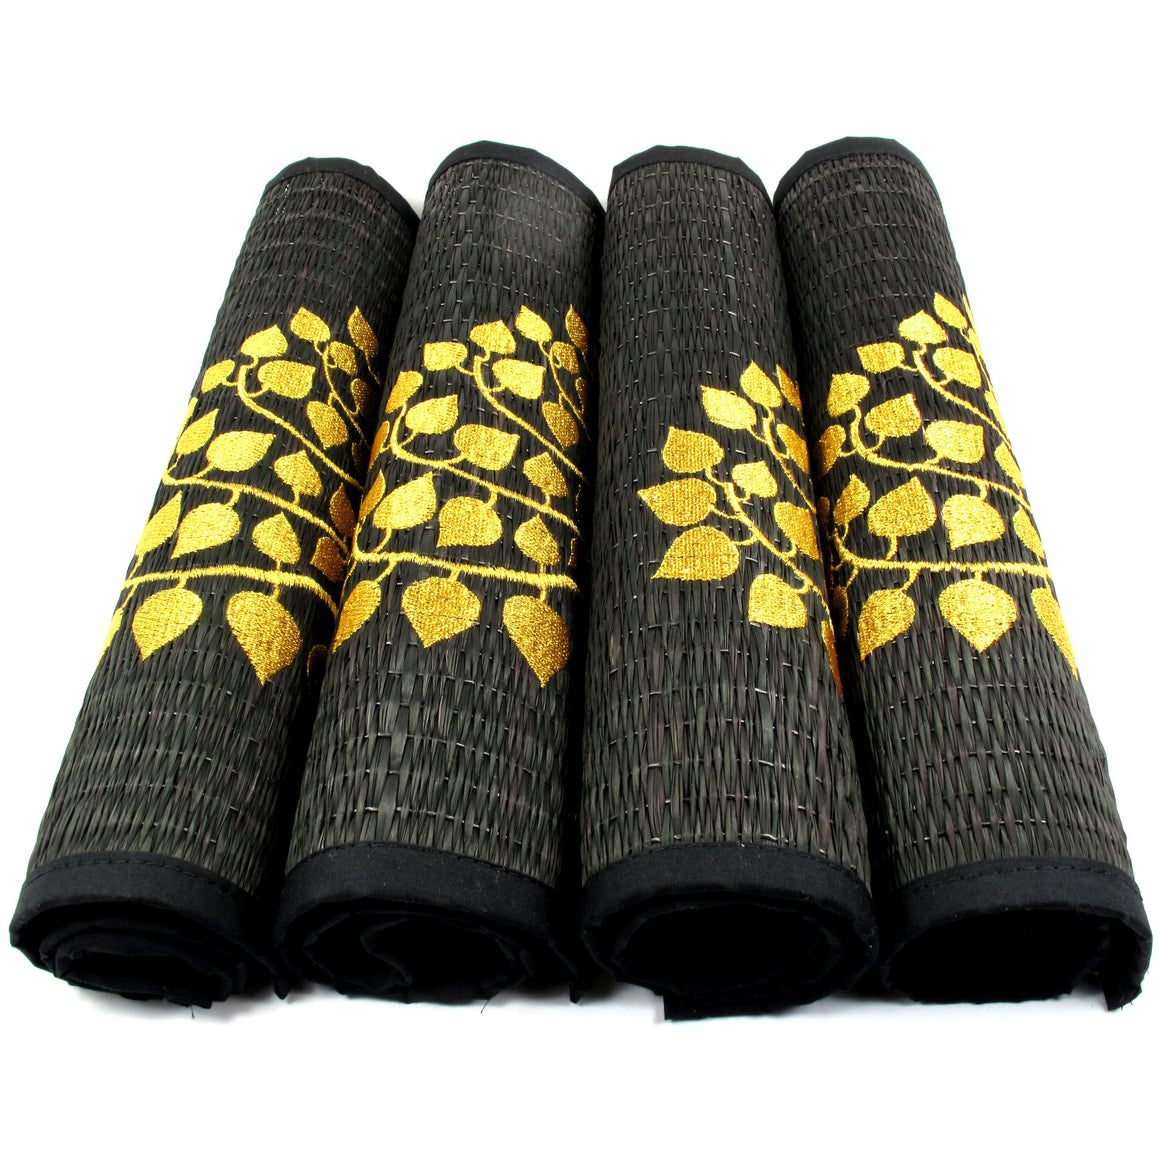 Woven Reed Placemats, Approx. 12" x 16", 4-Pack, Gold Bodhi Tree on Black - TropicaZona